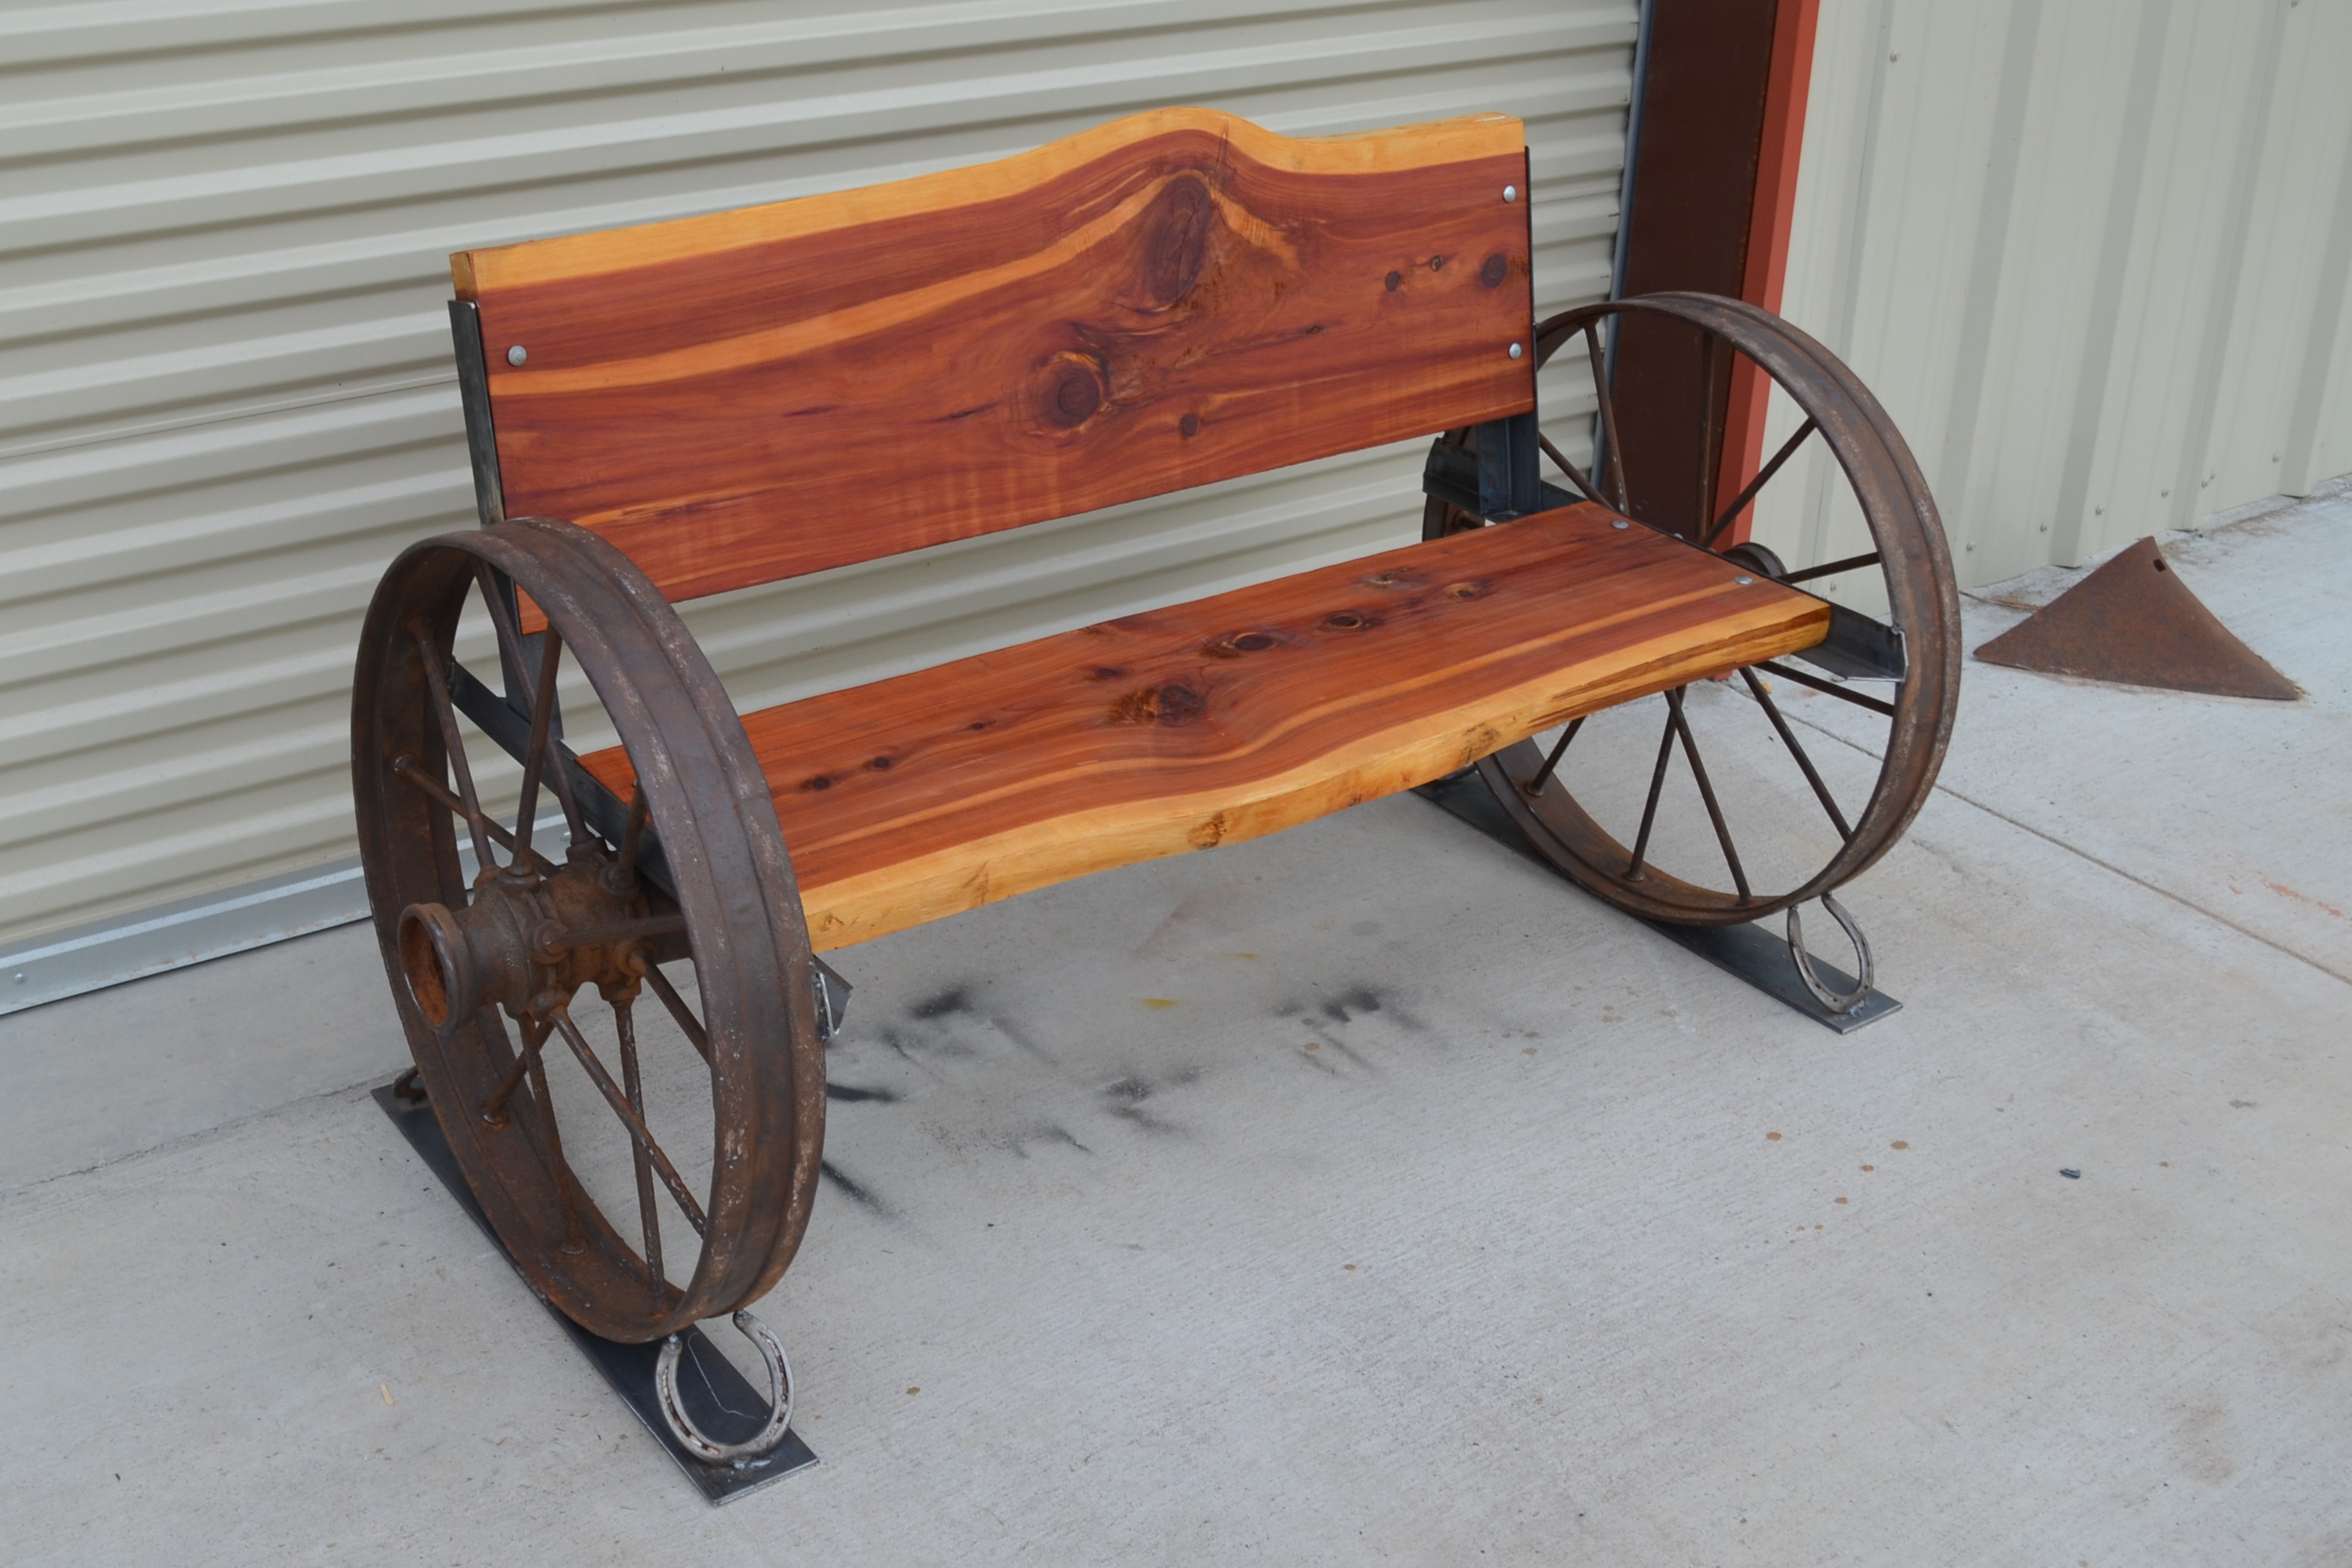 Check Out Our New Cedar Benches with Antique Wagon Wheels